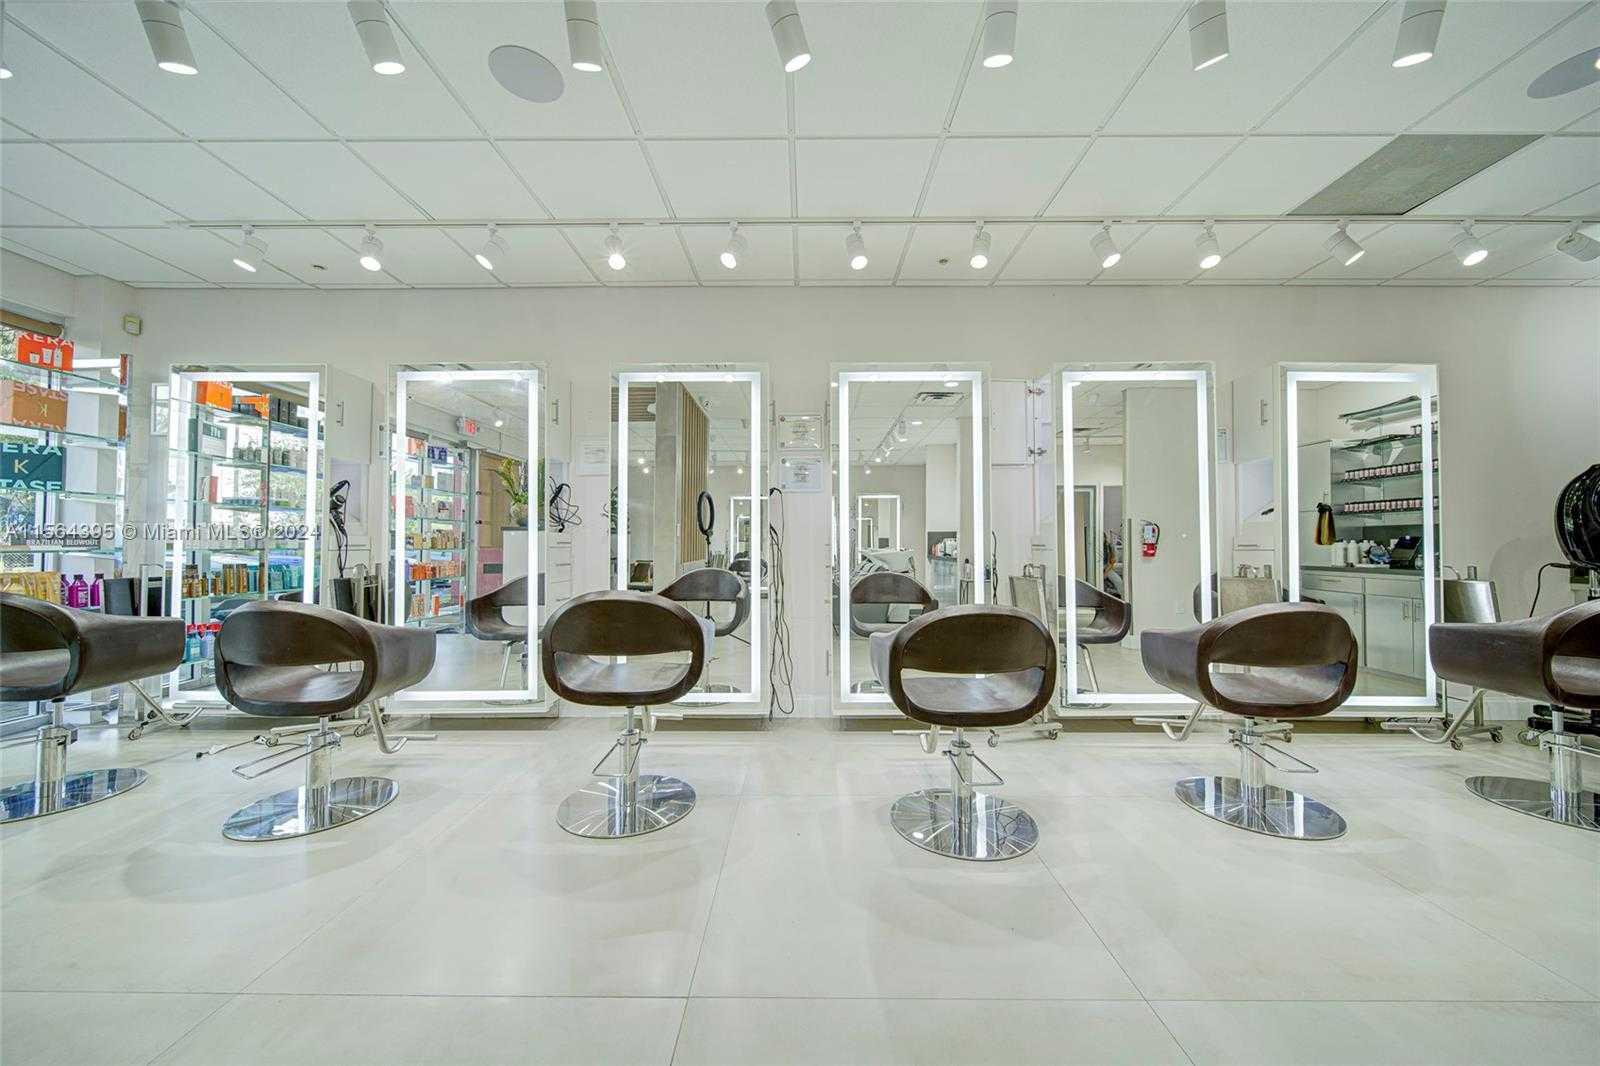 Beauty Salon For Sale in Hialeah with Real Estate Included, Hialeah, RETAIL SPACE,  for sale, Sandra Benkahla, The 305 Agency